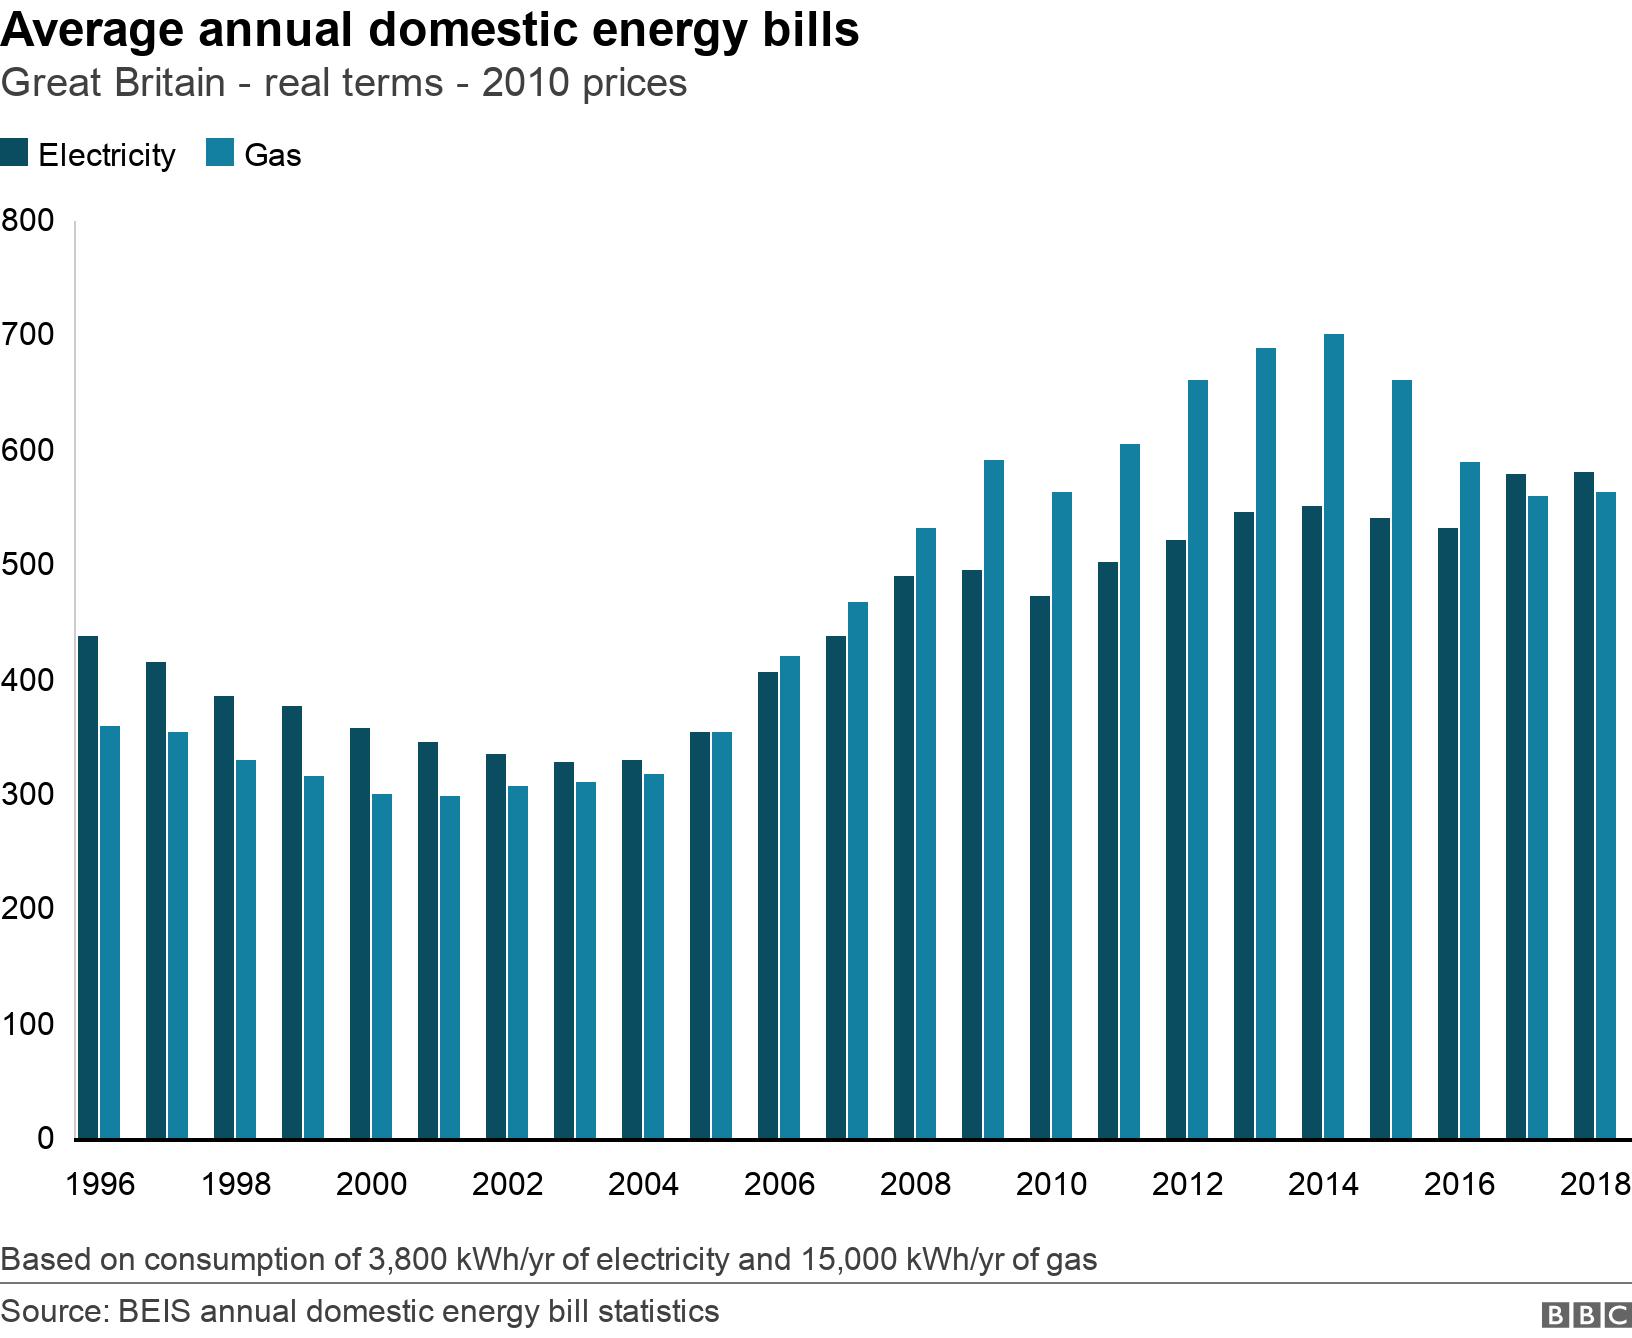 Average annual domestic energy bills. Great Britain - real terms - 2010 prices.  Based on consumption of 3,800 kWh/yr of electricity and 15,000 kWh/yr of gas.